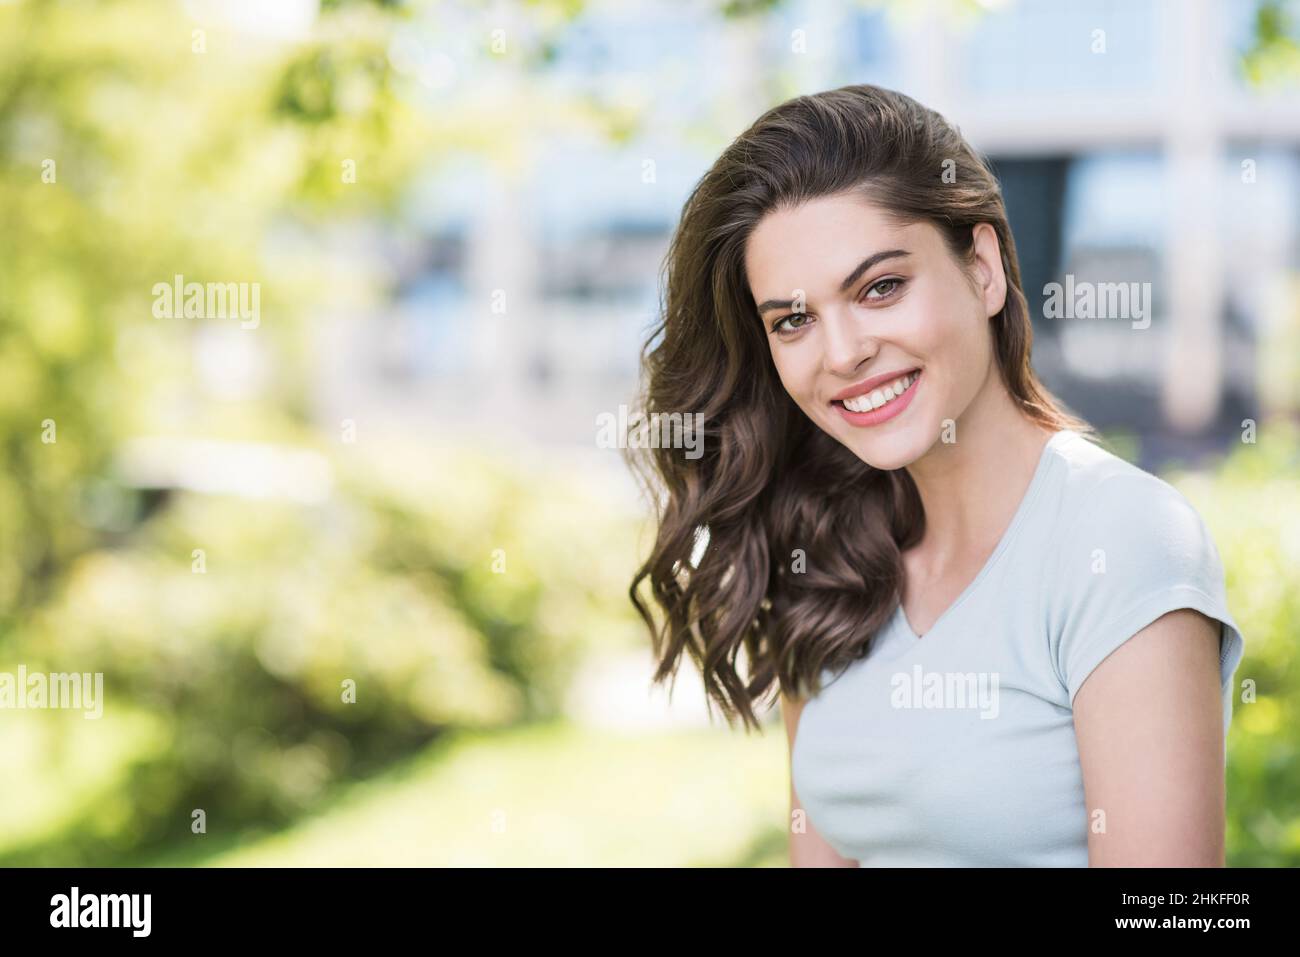 Beautiful happy young woman closeup portrait. Pretty model girl with perfect fresh clean skin smiling outdoors, Stock Photo